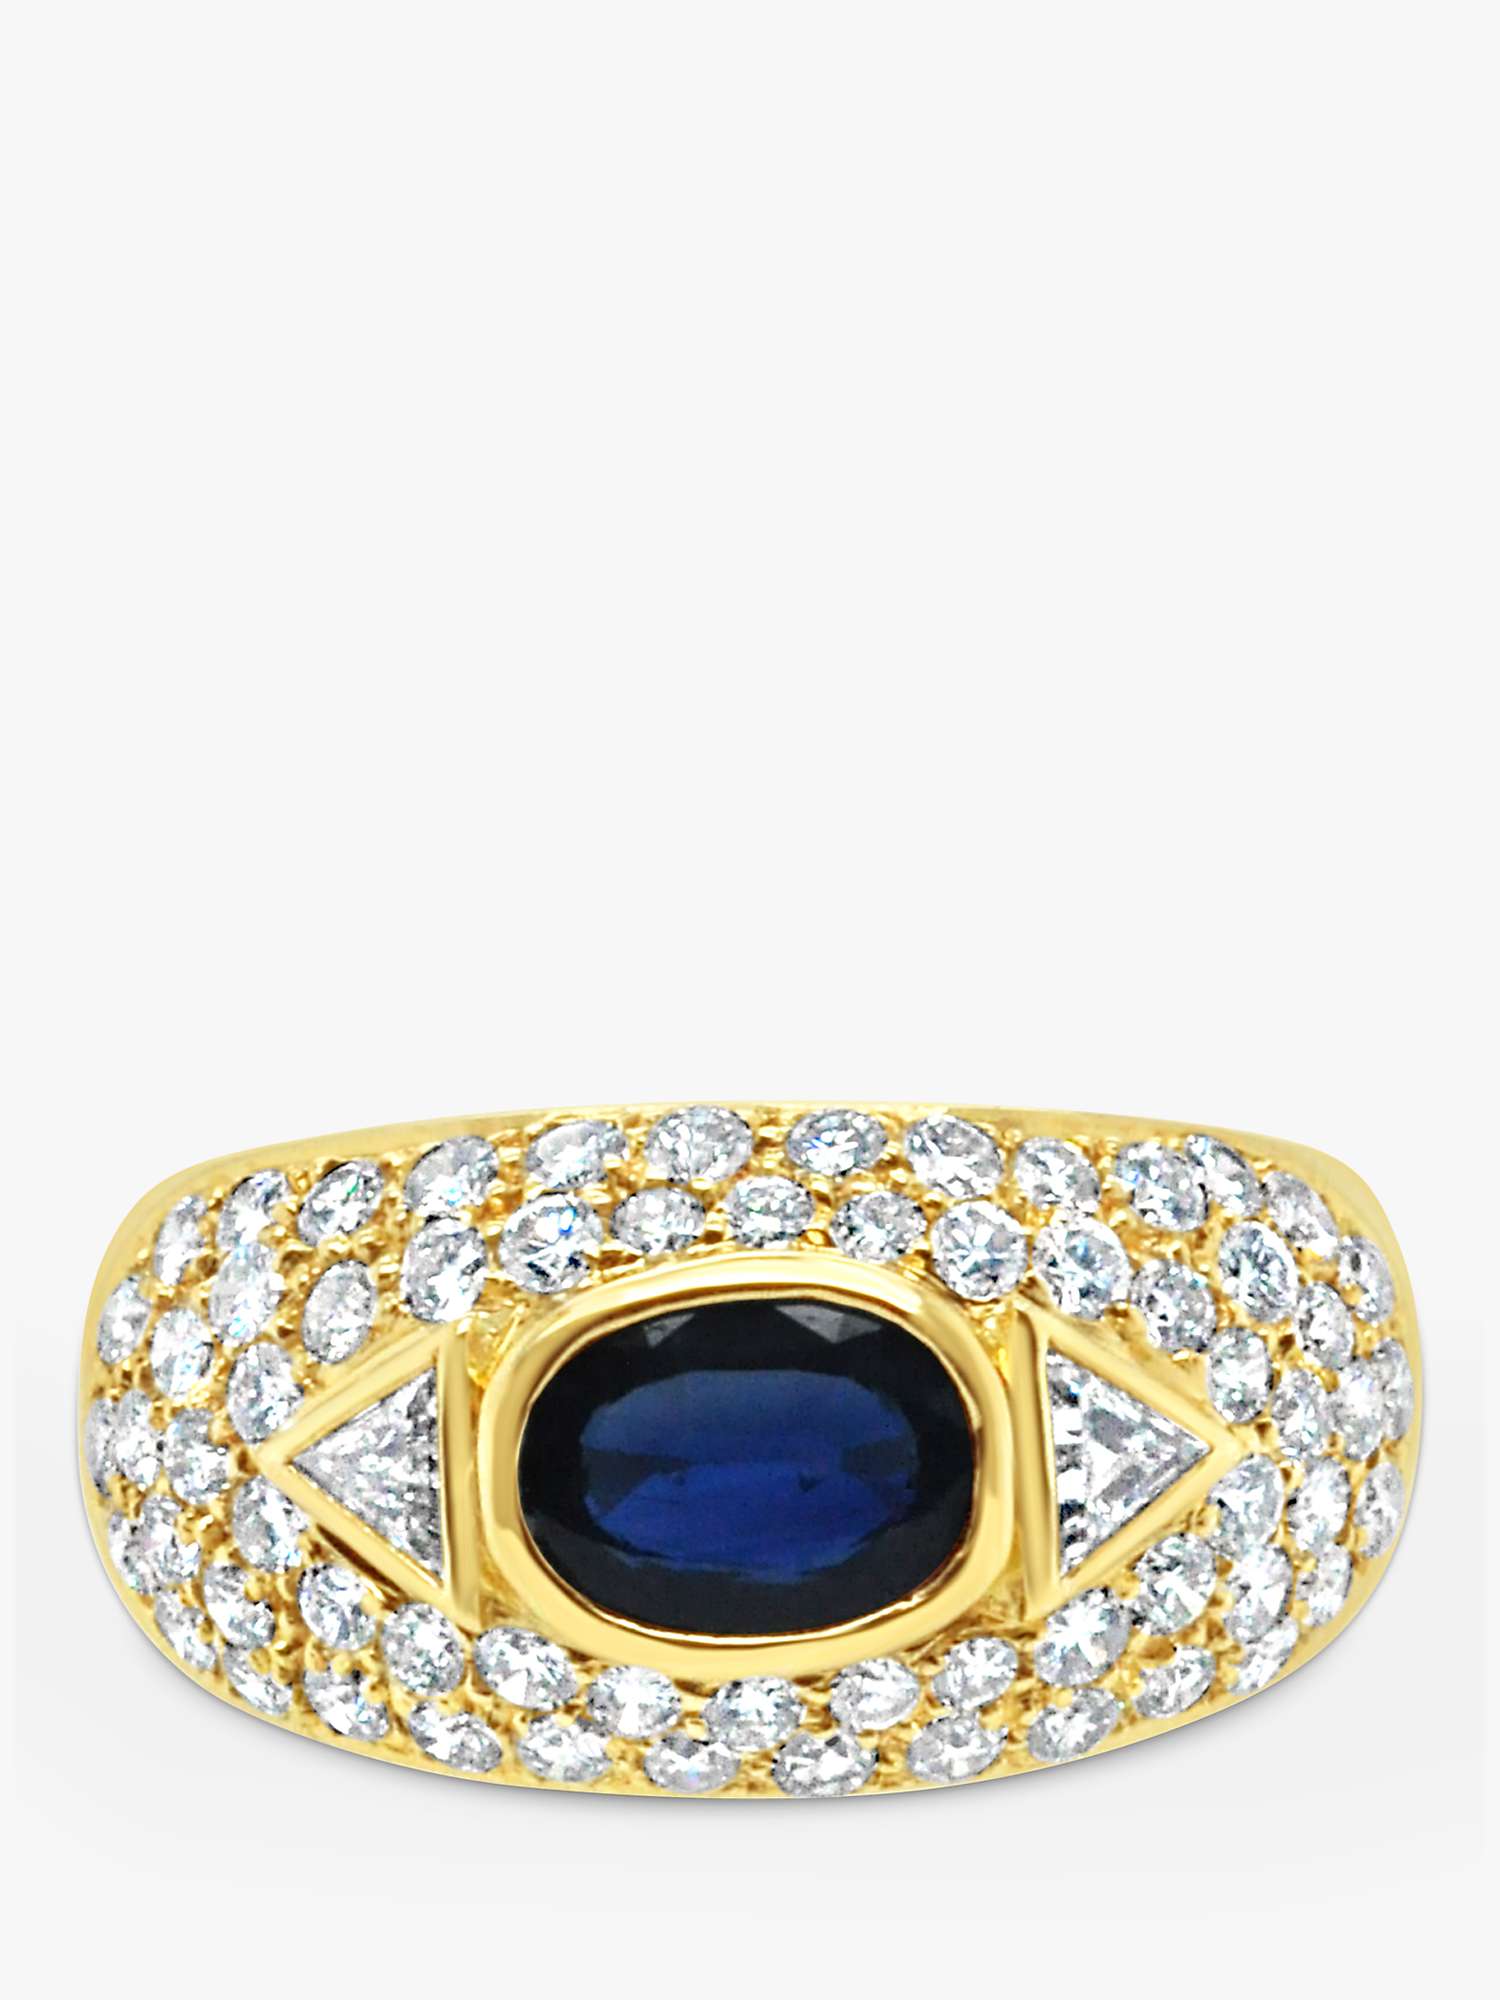 Buy Milton & Humble Jewellery Second Hand 18ct Gold Diamond and Sapphire Domed Band Ring, Dated Edinburgh 2017 Online at johnlewis.com